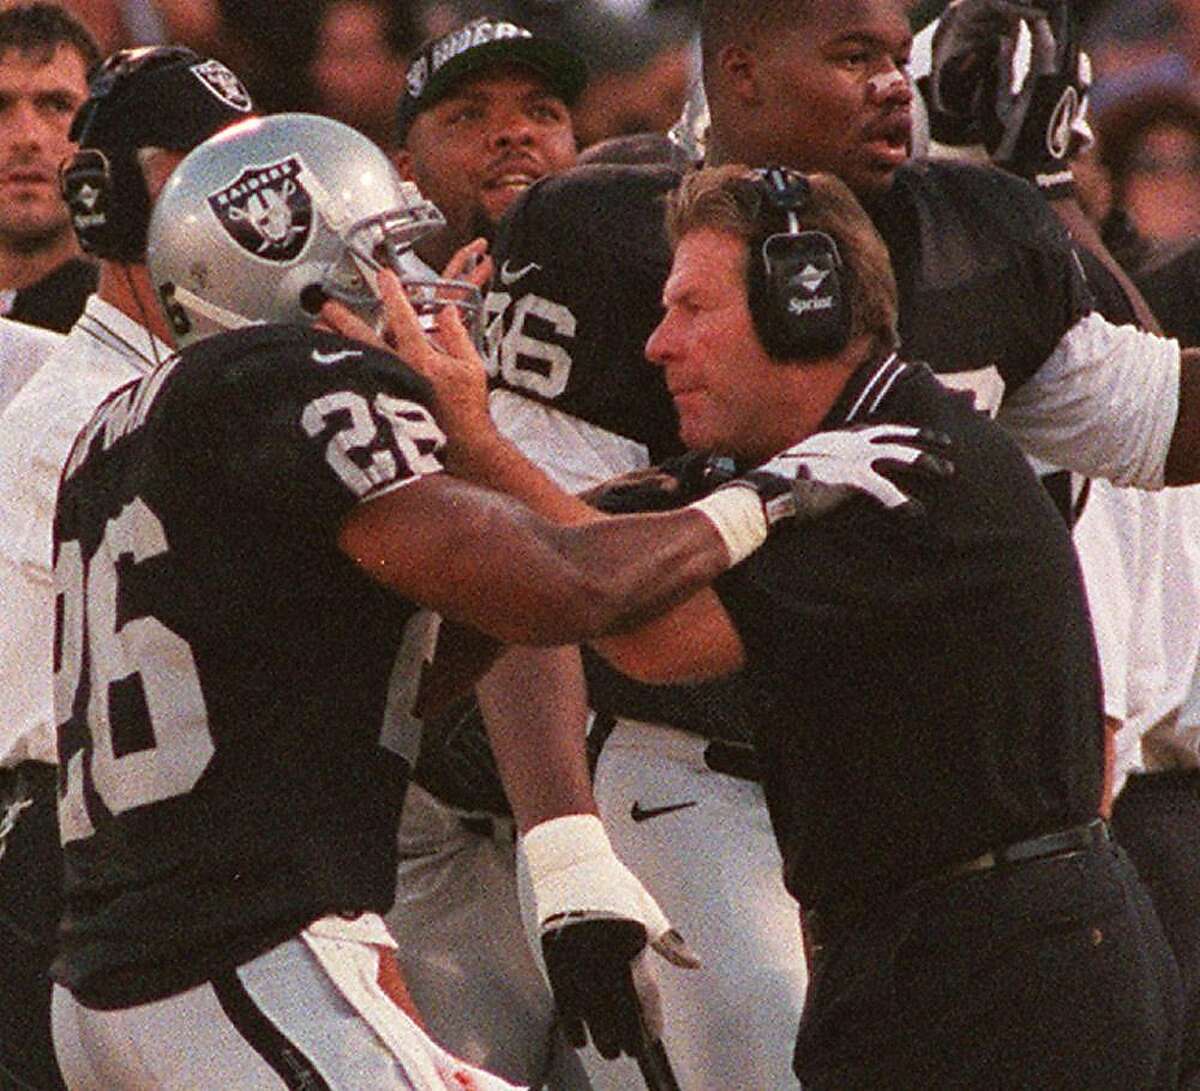 RAIDERS BUGEL/08SEP97/SP/FRL: Joe Bugel congratulated Napoleon Kaugman on the sidelines after his TD. Chronicle photo by Frederic Larson